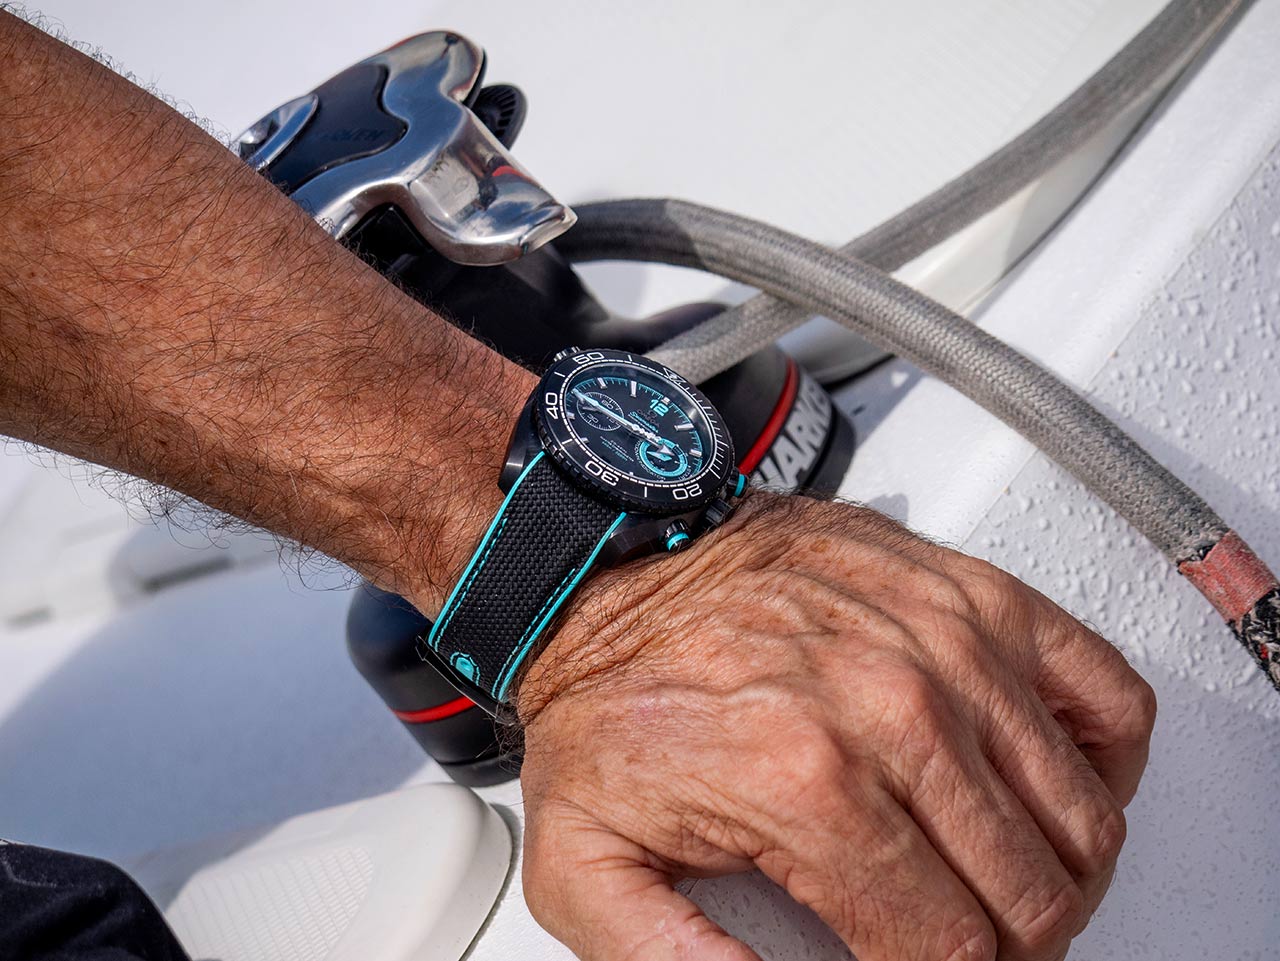 The America's Cup Seamaster Pro 300M Racing Chronograph - A Complicated  Regatta Timer